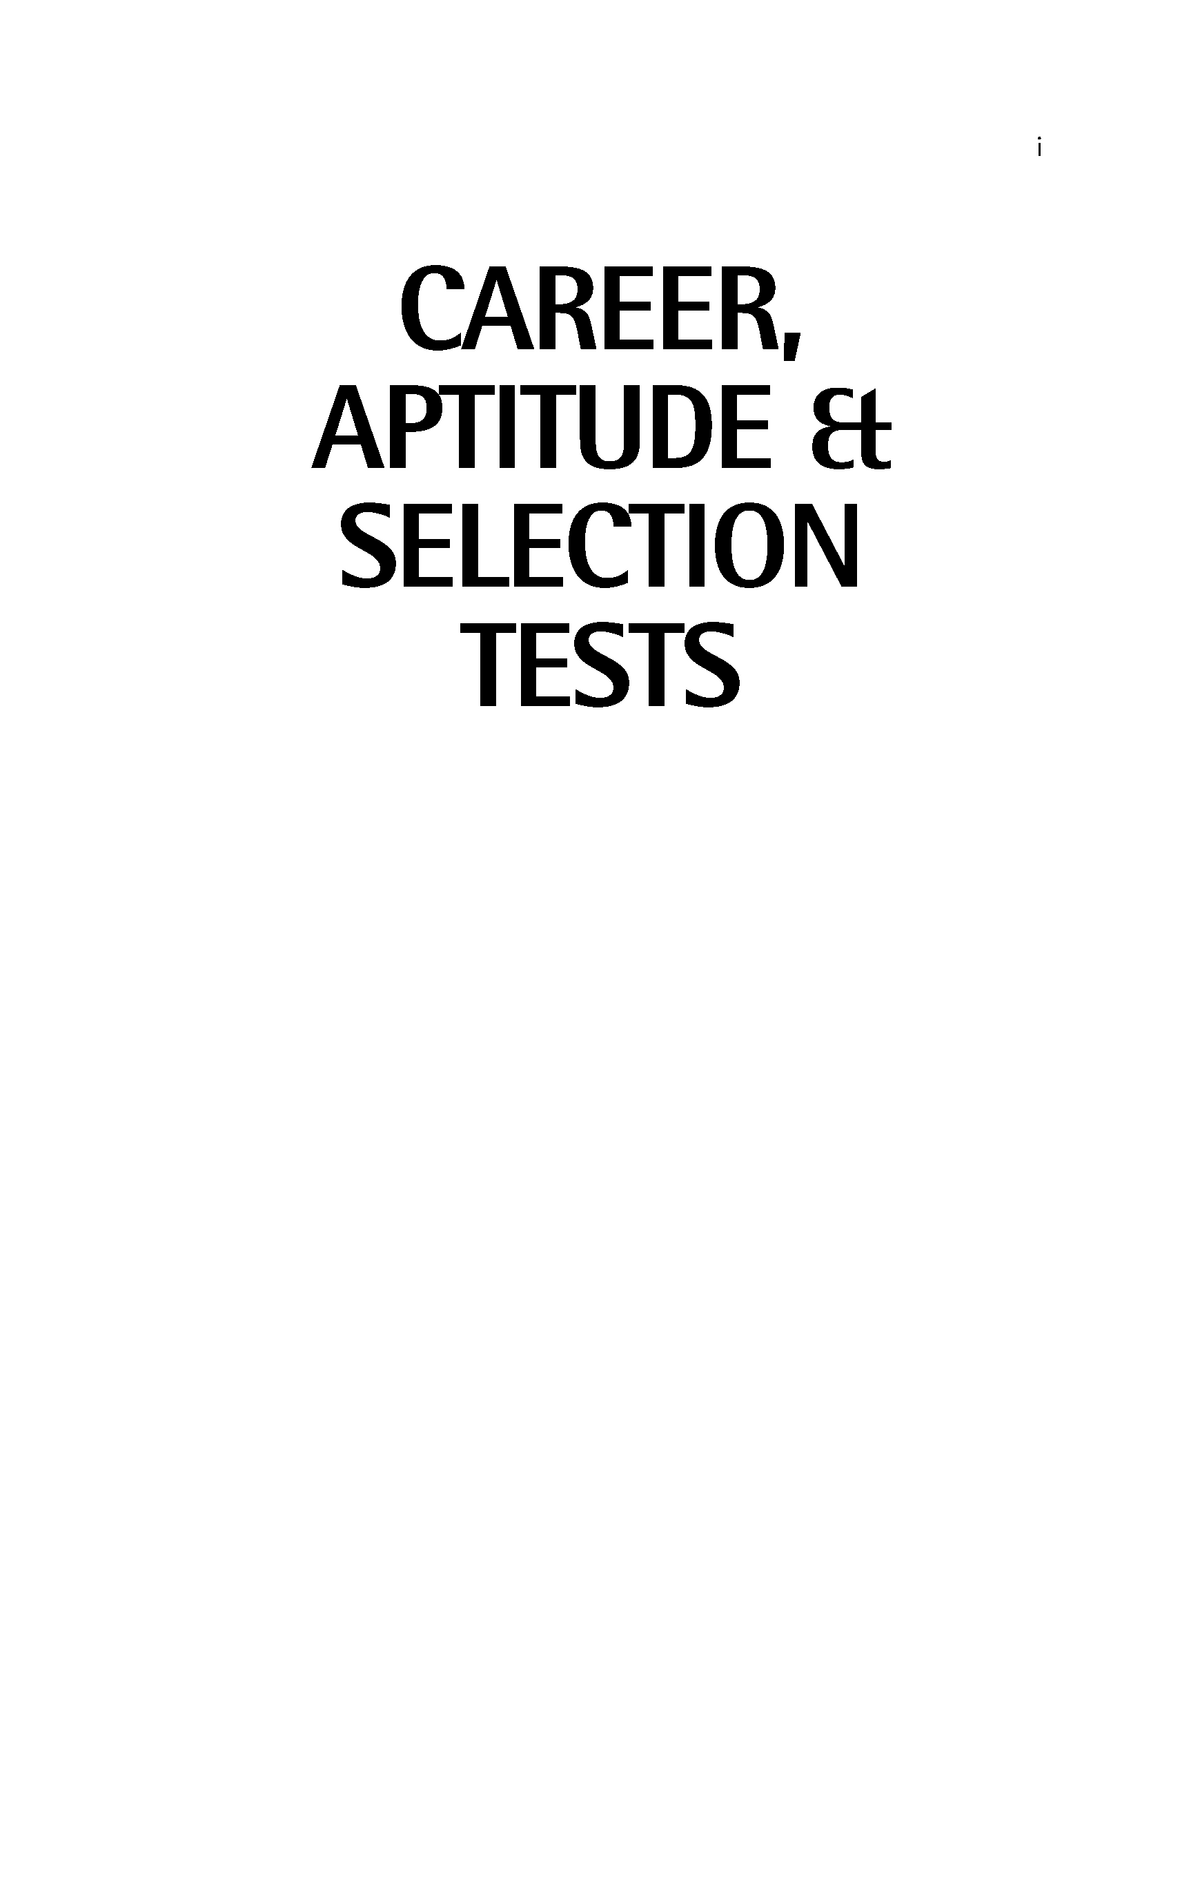 Areer Aptitude Selection Tests Match Your Iq Personality